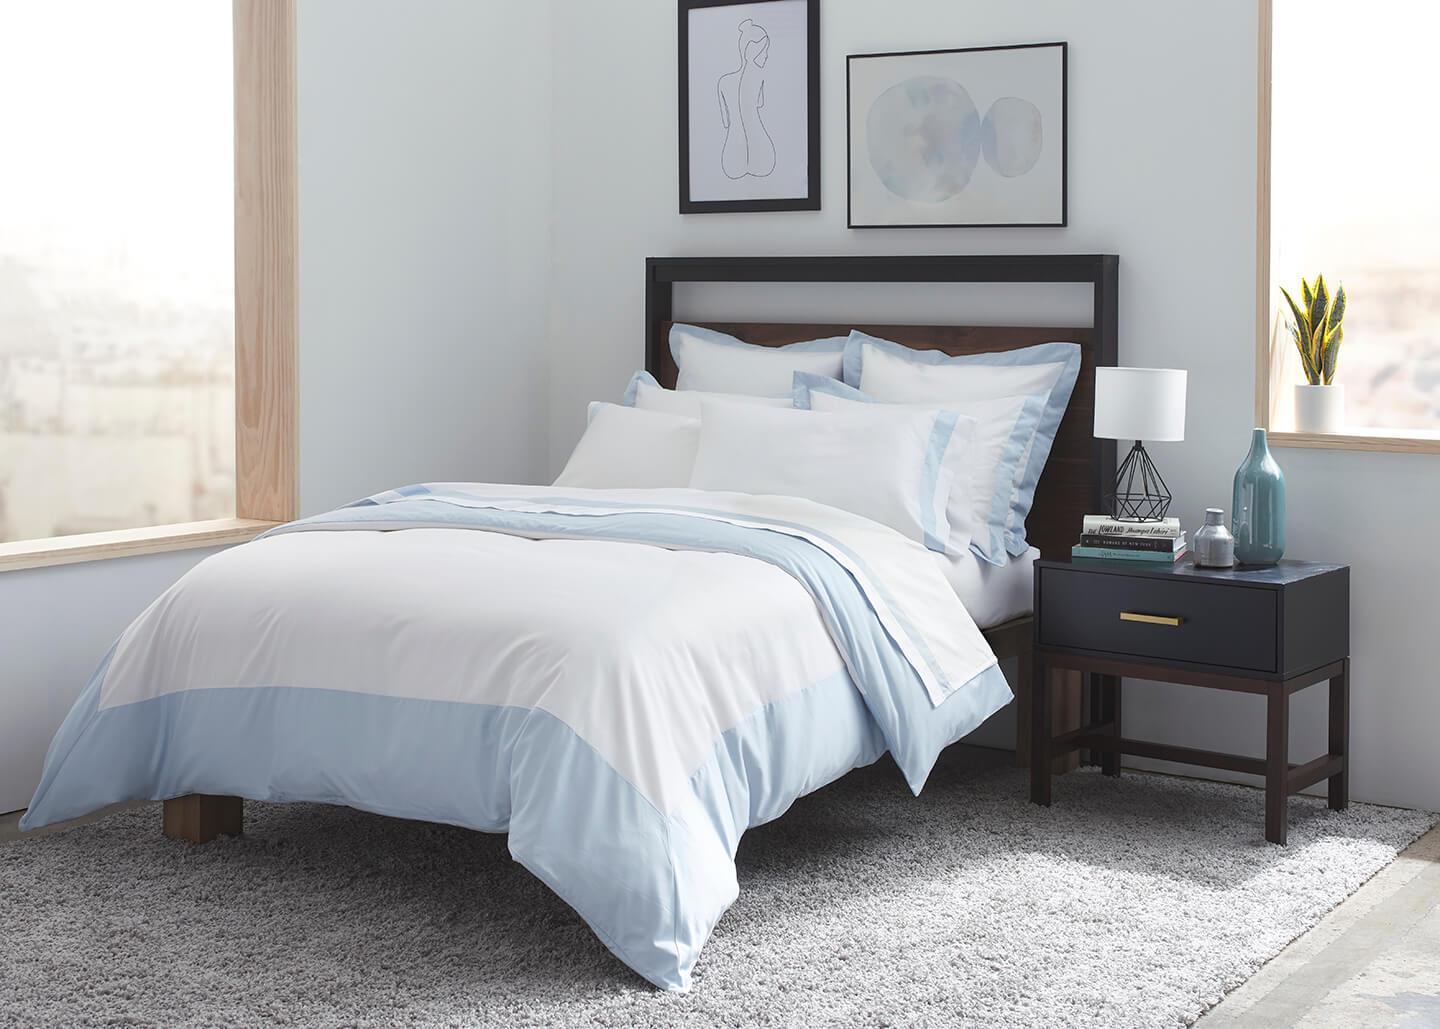 sobel Westex pure elegance sateen duvet set in blue and white displayed on a double bed